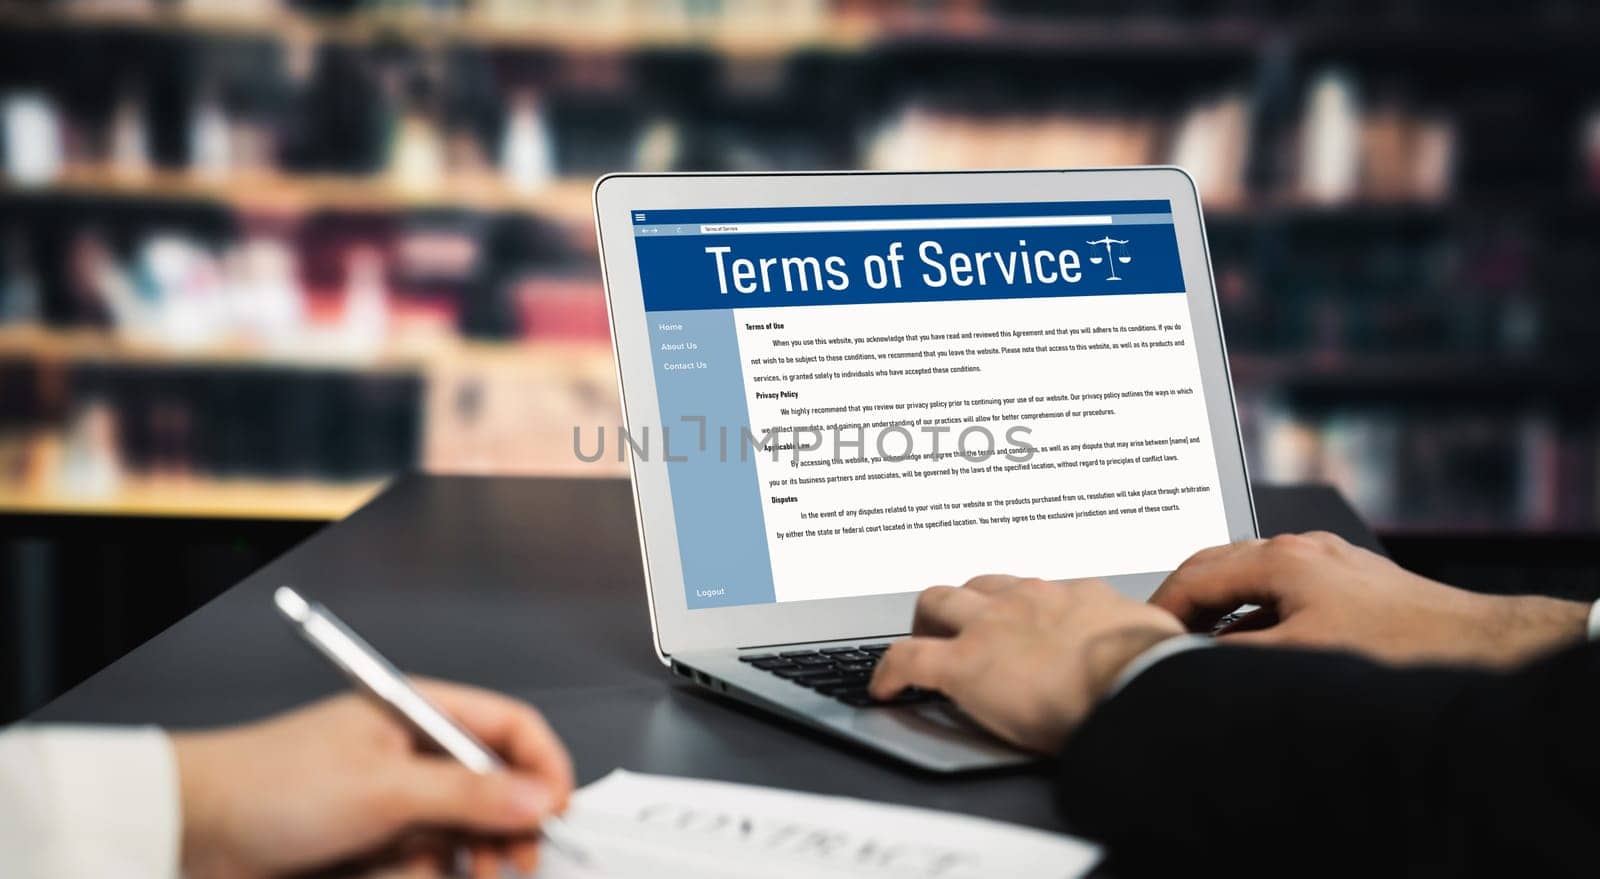 Online term of service conditions showing savvy rules and regulations in using by biancoblue